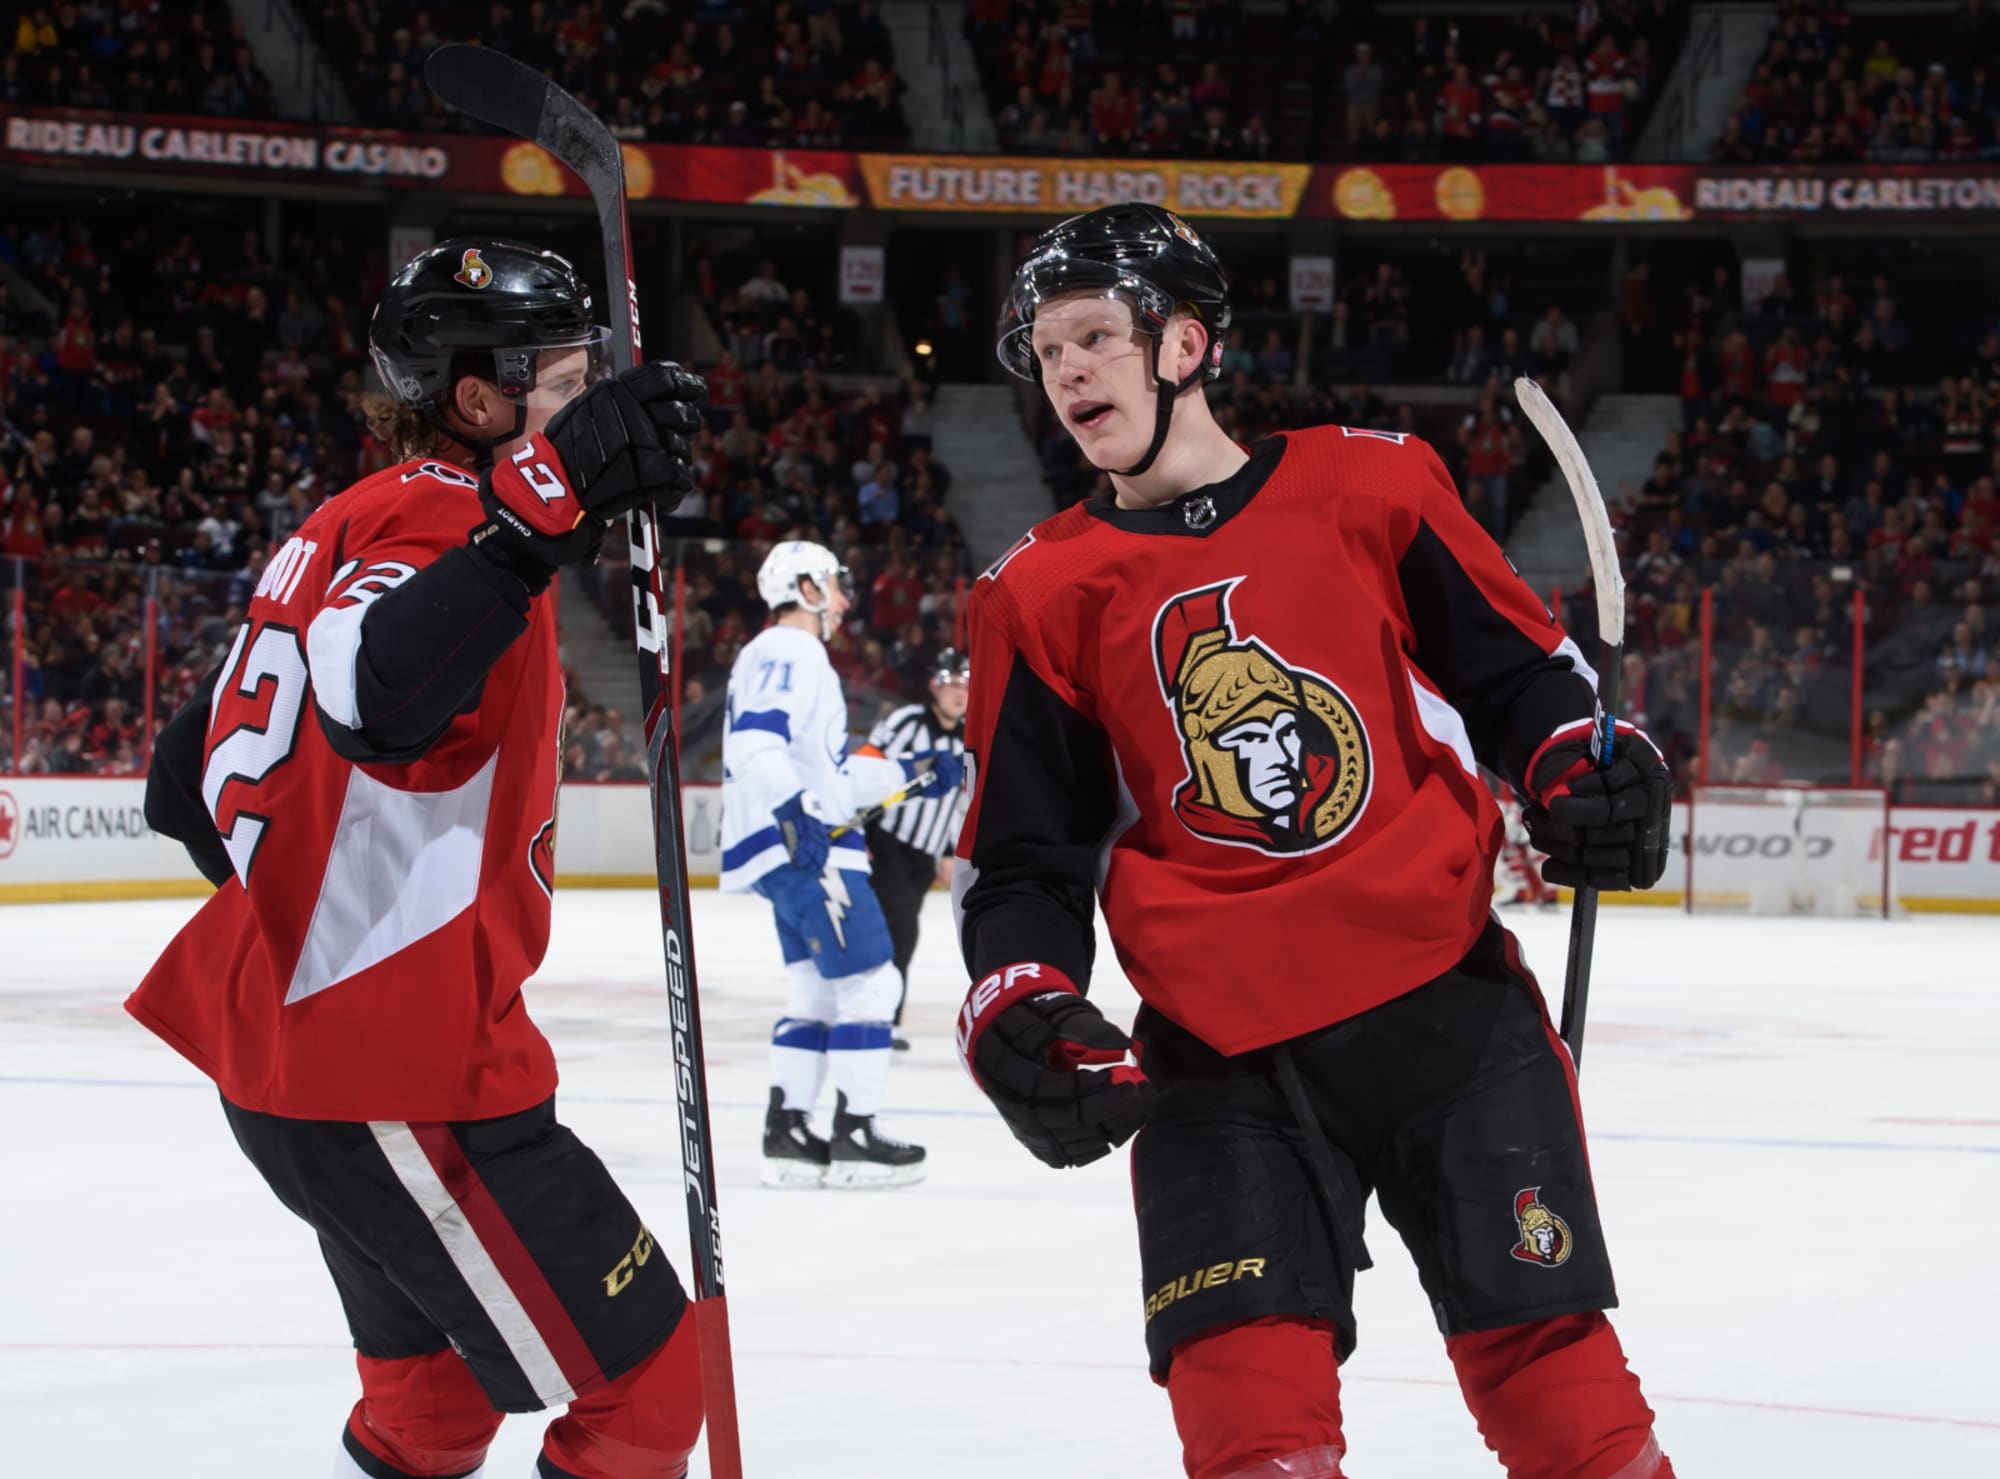 Erik Karlsson would accept Sens captaincy. Is he the right pick